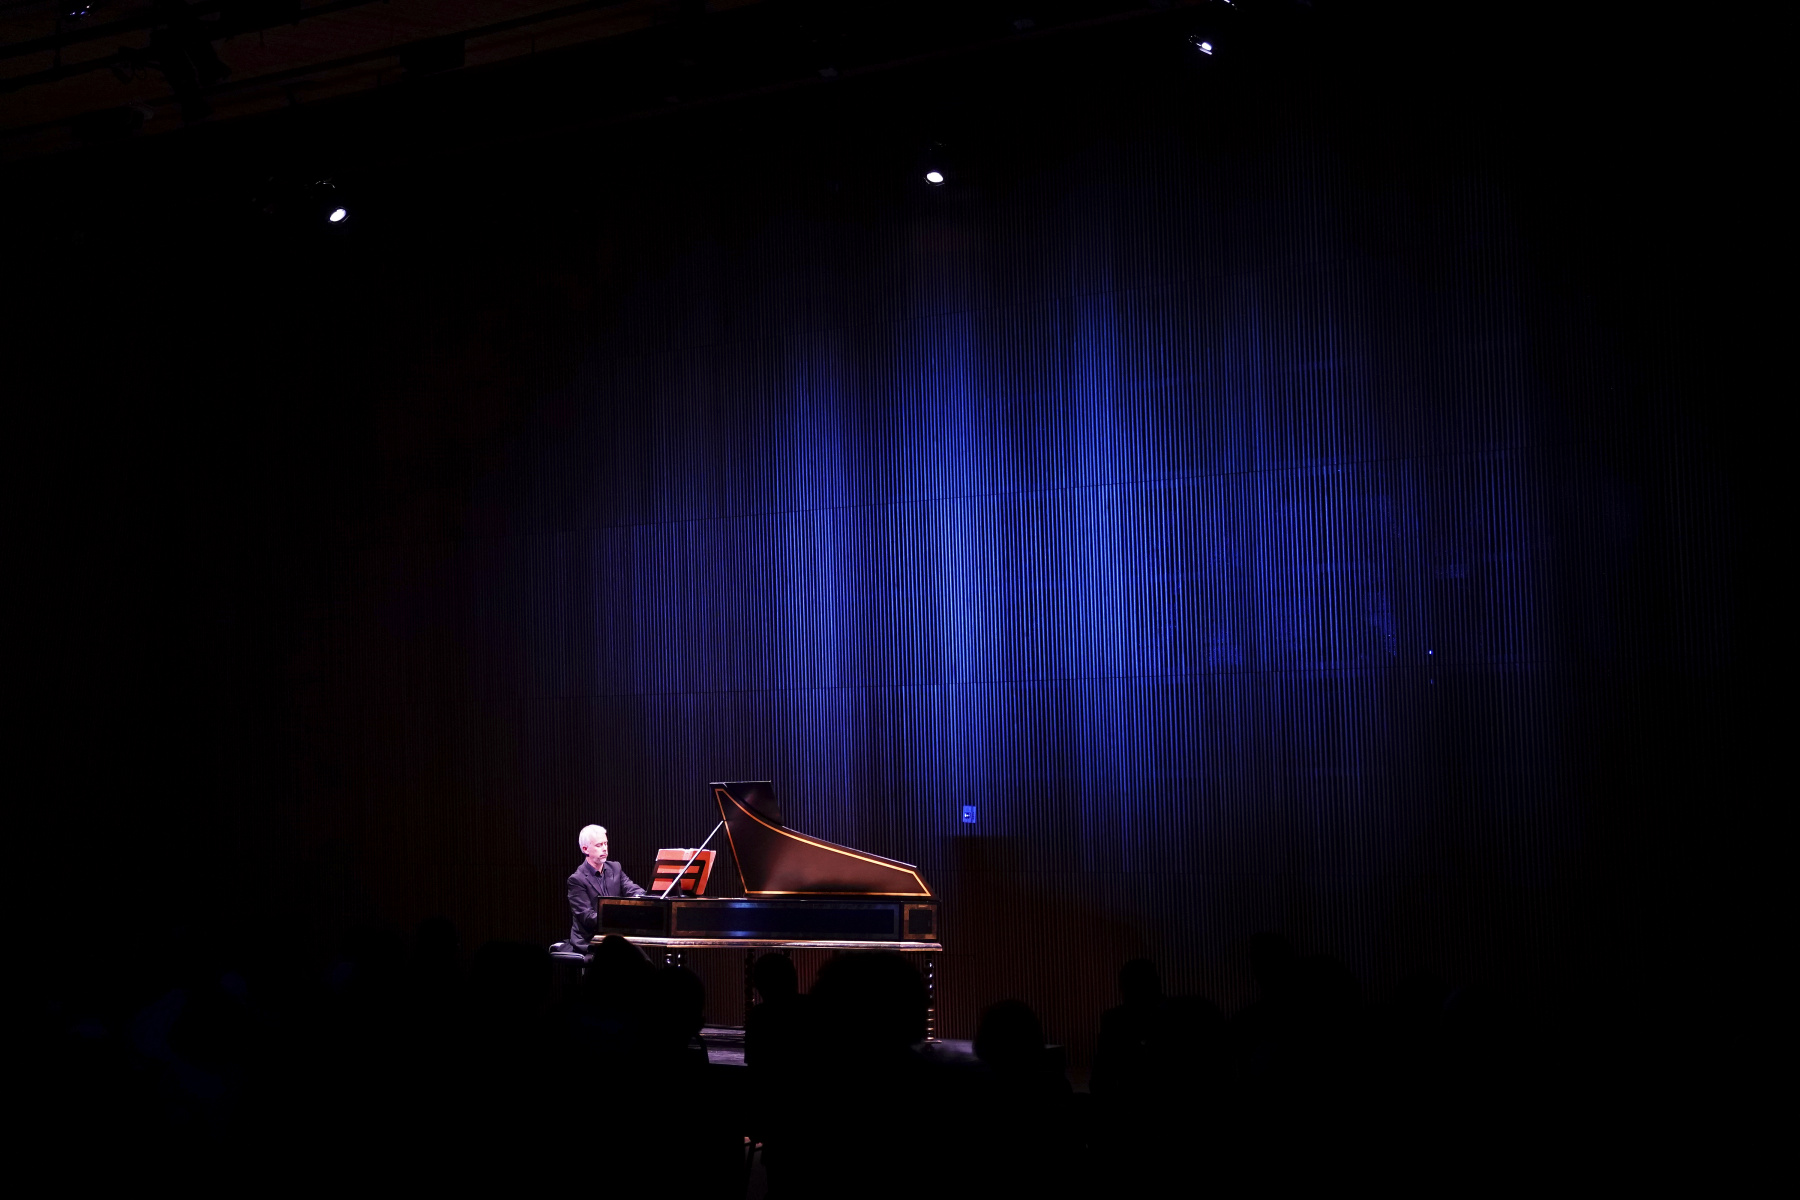 Goldberg Variations at the Dimenna Center, Orchestra of St. Lukes.  Pierre Hantai, Harpsichord.  6/19/2019 : The Arts : Photography by Adam Stoltman: Sports Photography, The Arts, Portraiture, Travel, Photojournalism and Fine Art in New York